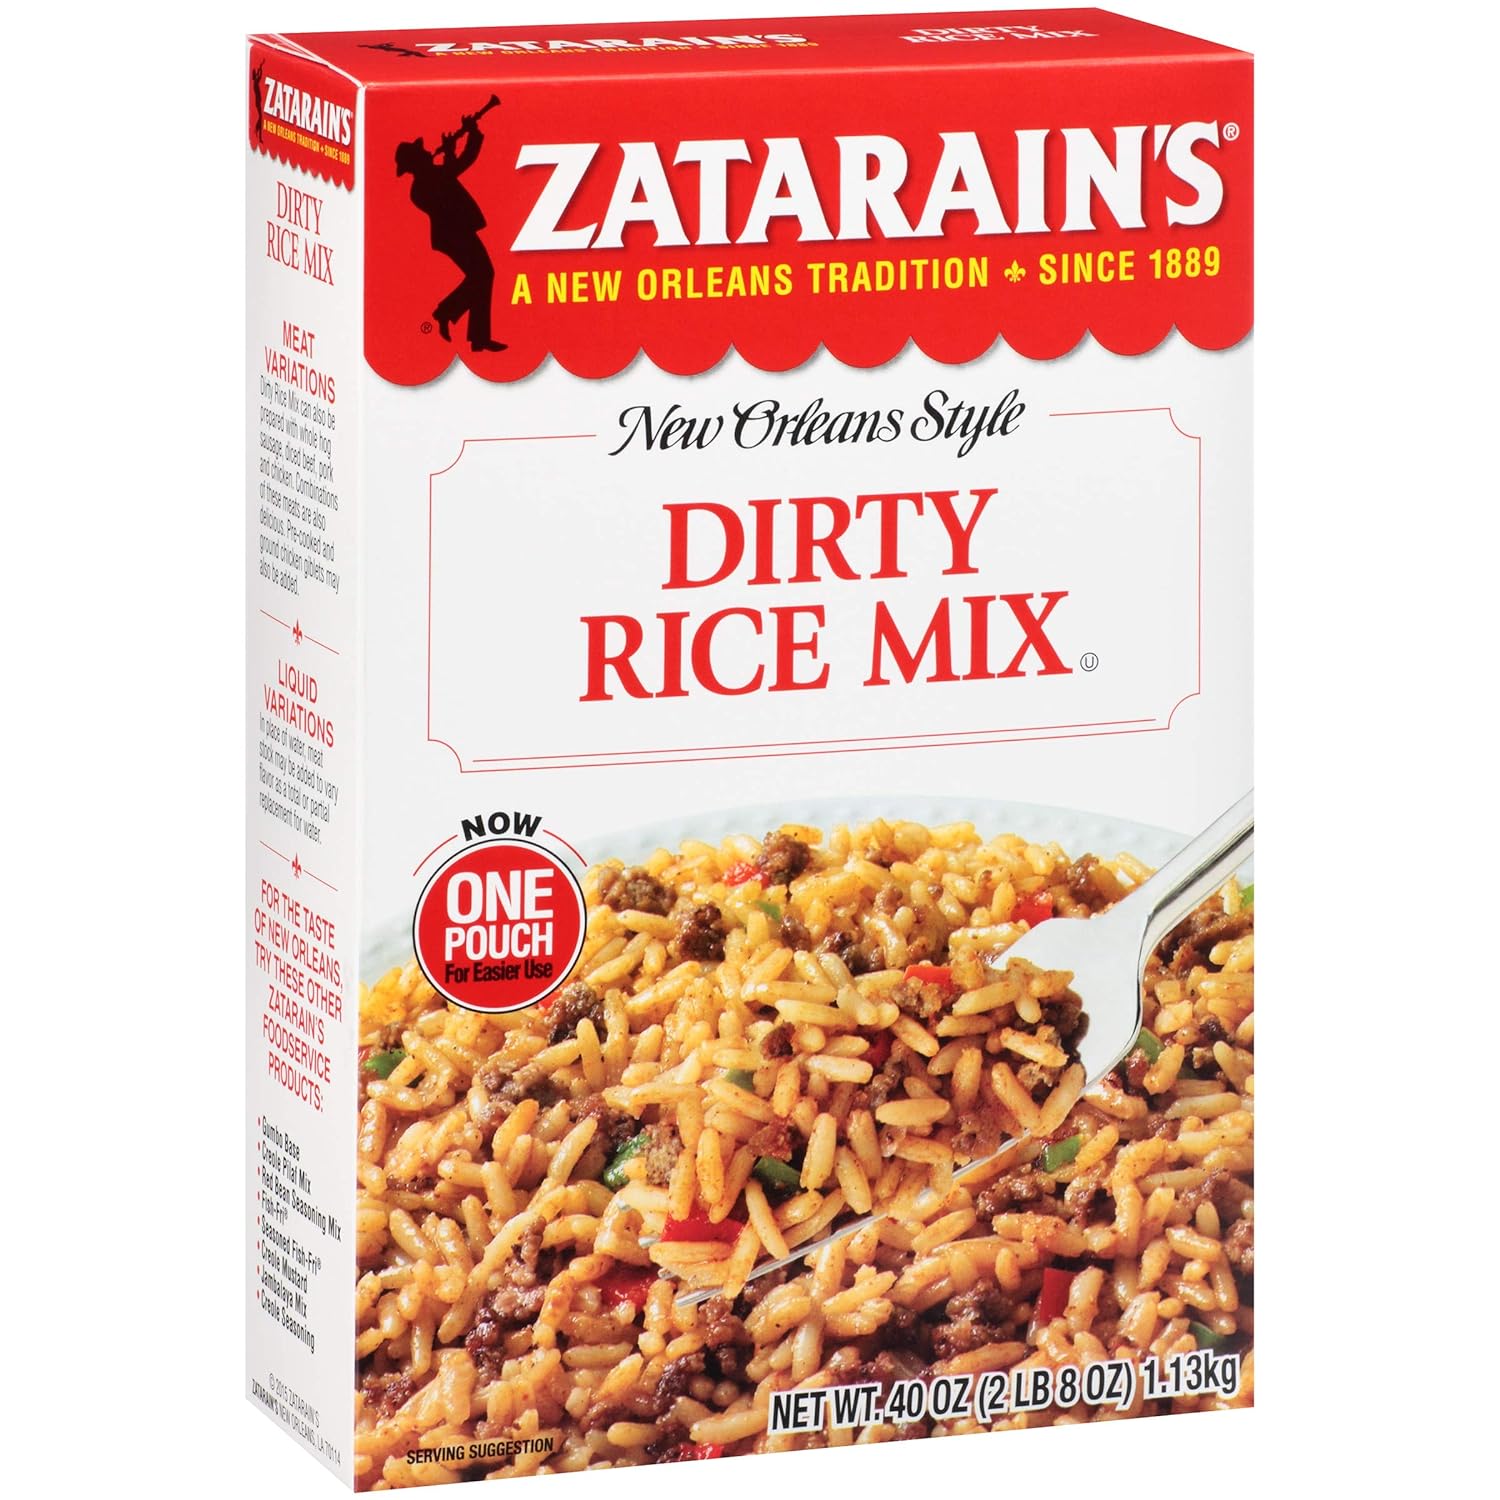 Zatarain's Dirty Rice Mix, 40 oz - One 40 Ounce Box of New Orleans Style Dirty Rice Mix with Premium Blend of Long Grain Rice, Vegetables and Cajun Spices